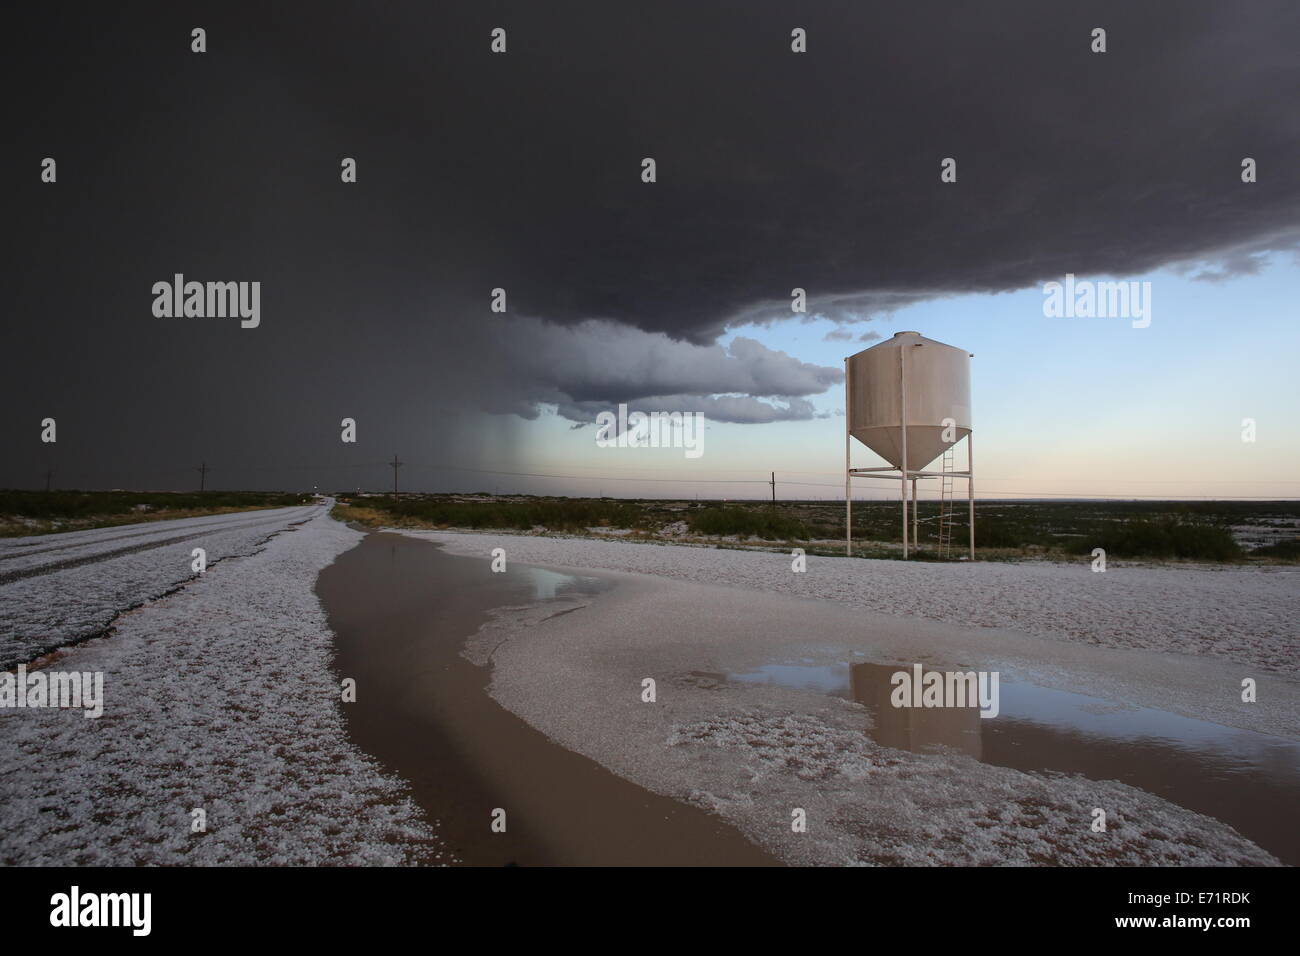 Hail on a road after a hail storm near Carlsbad, New Mexico. Stock Photo